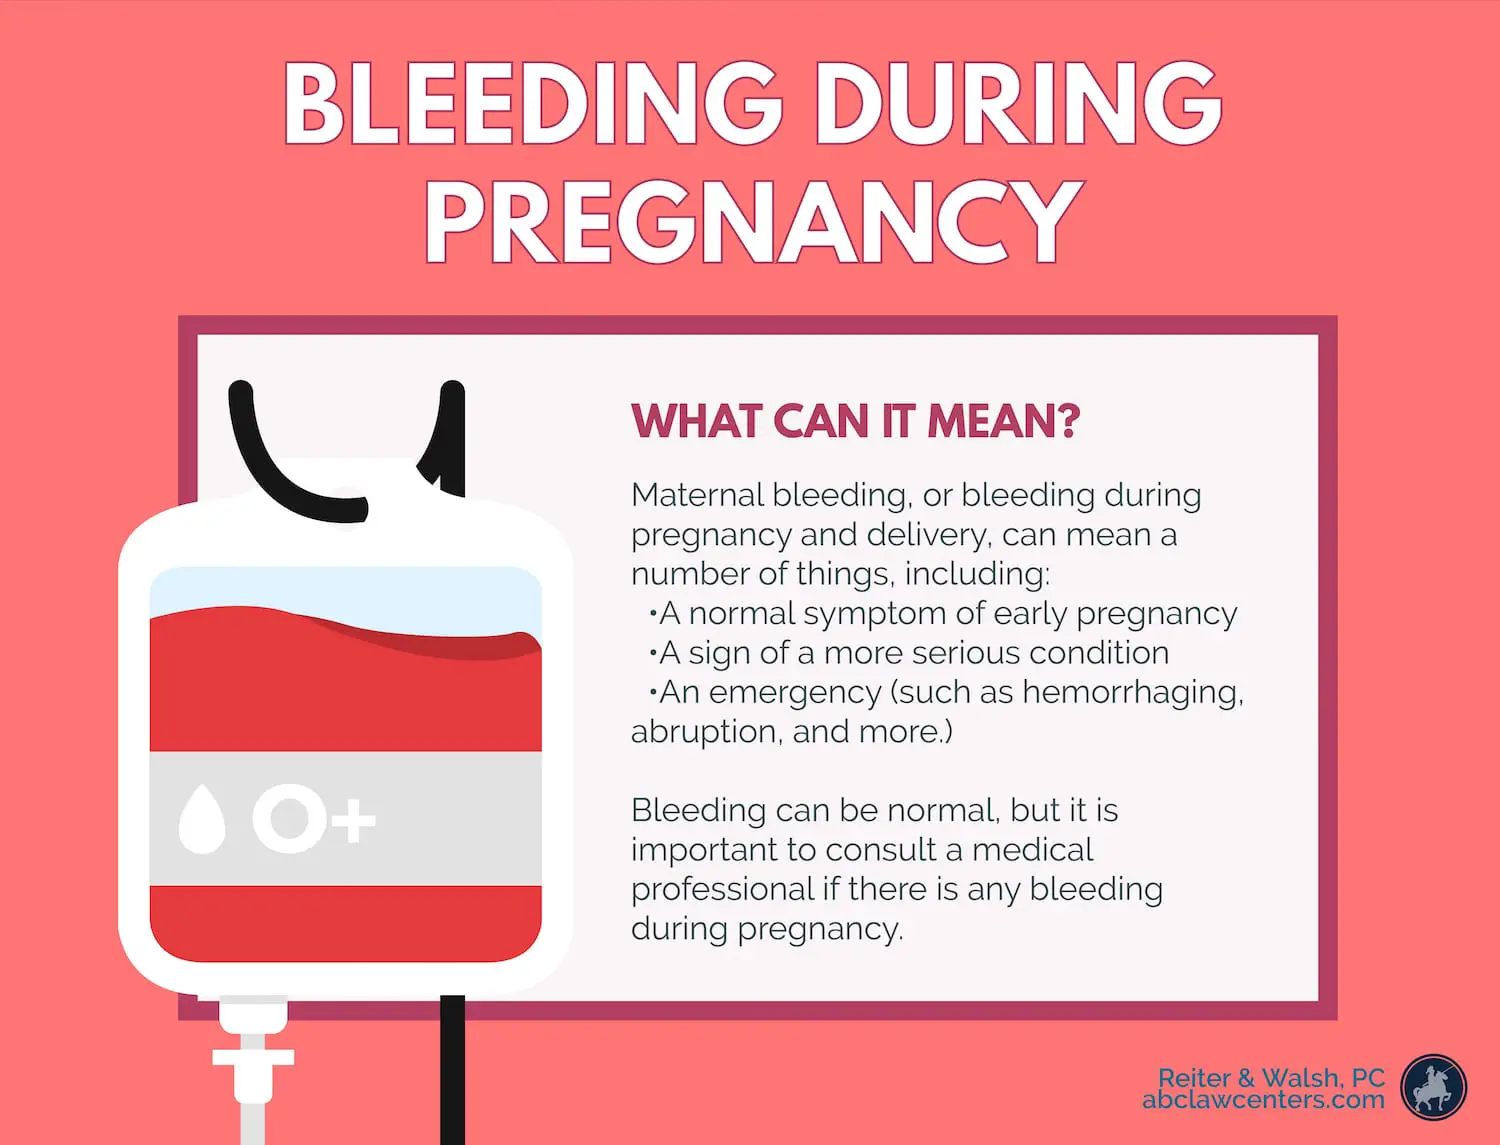 Bleeding During Pregnancy and Birth: Risks to the Baby